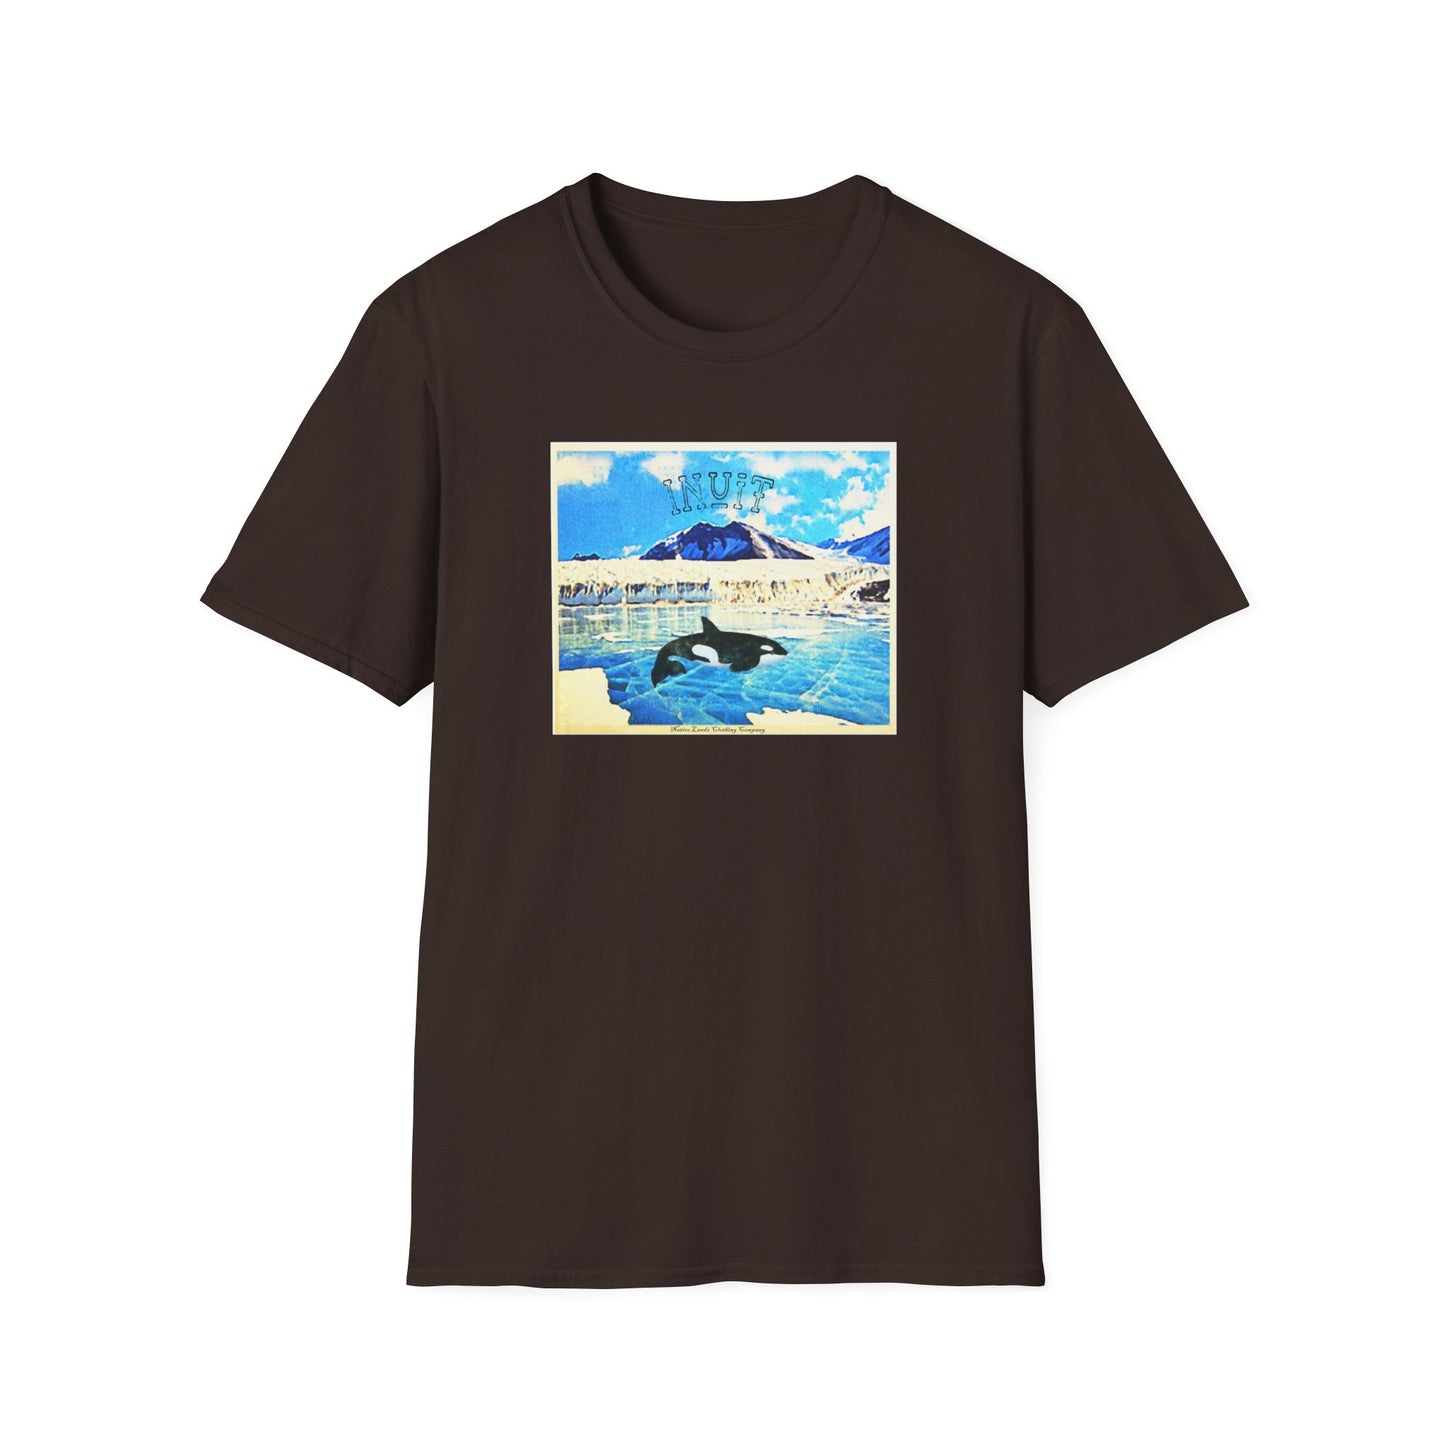 Inuit Tribe Shirt Orca Cotton Native American